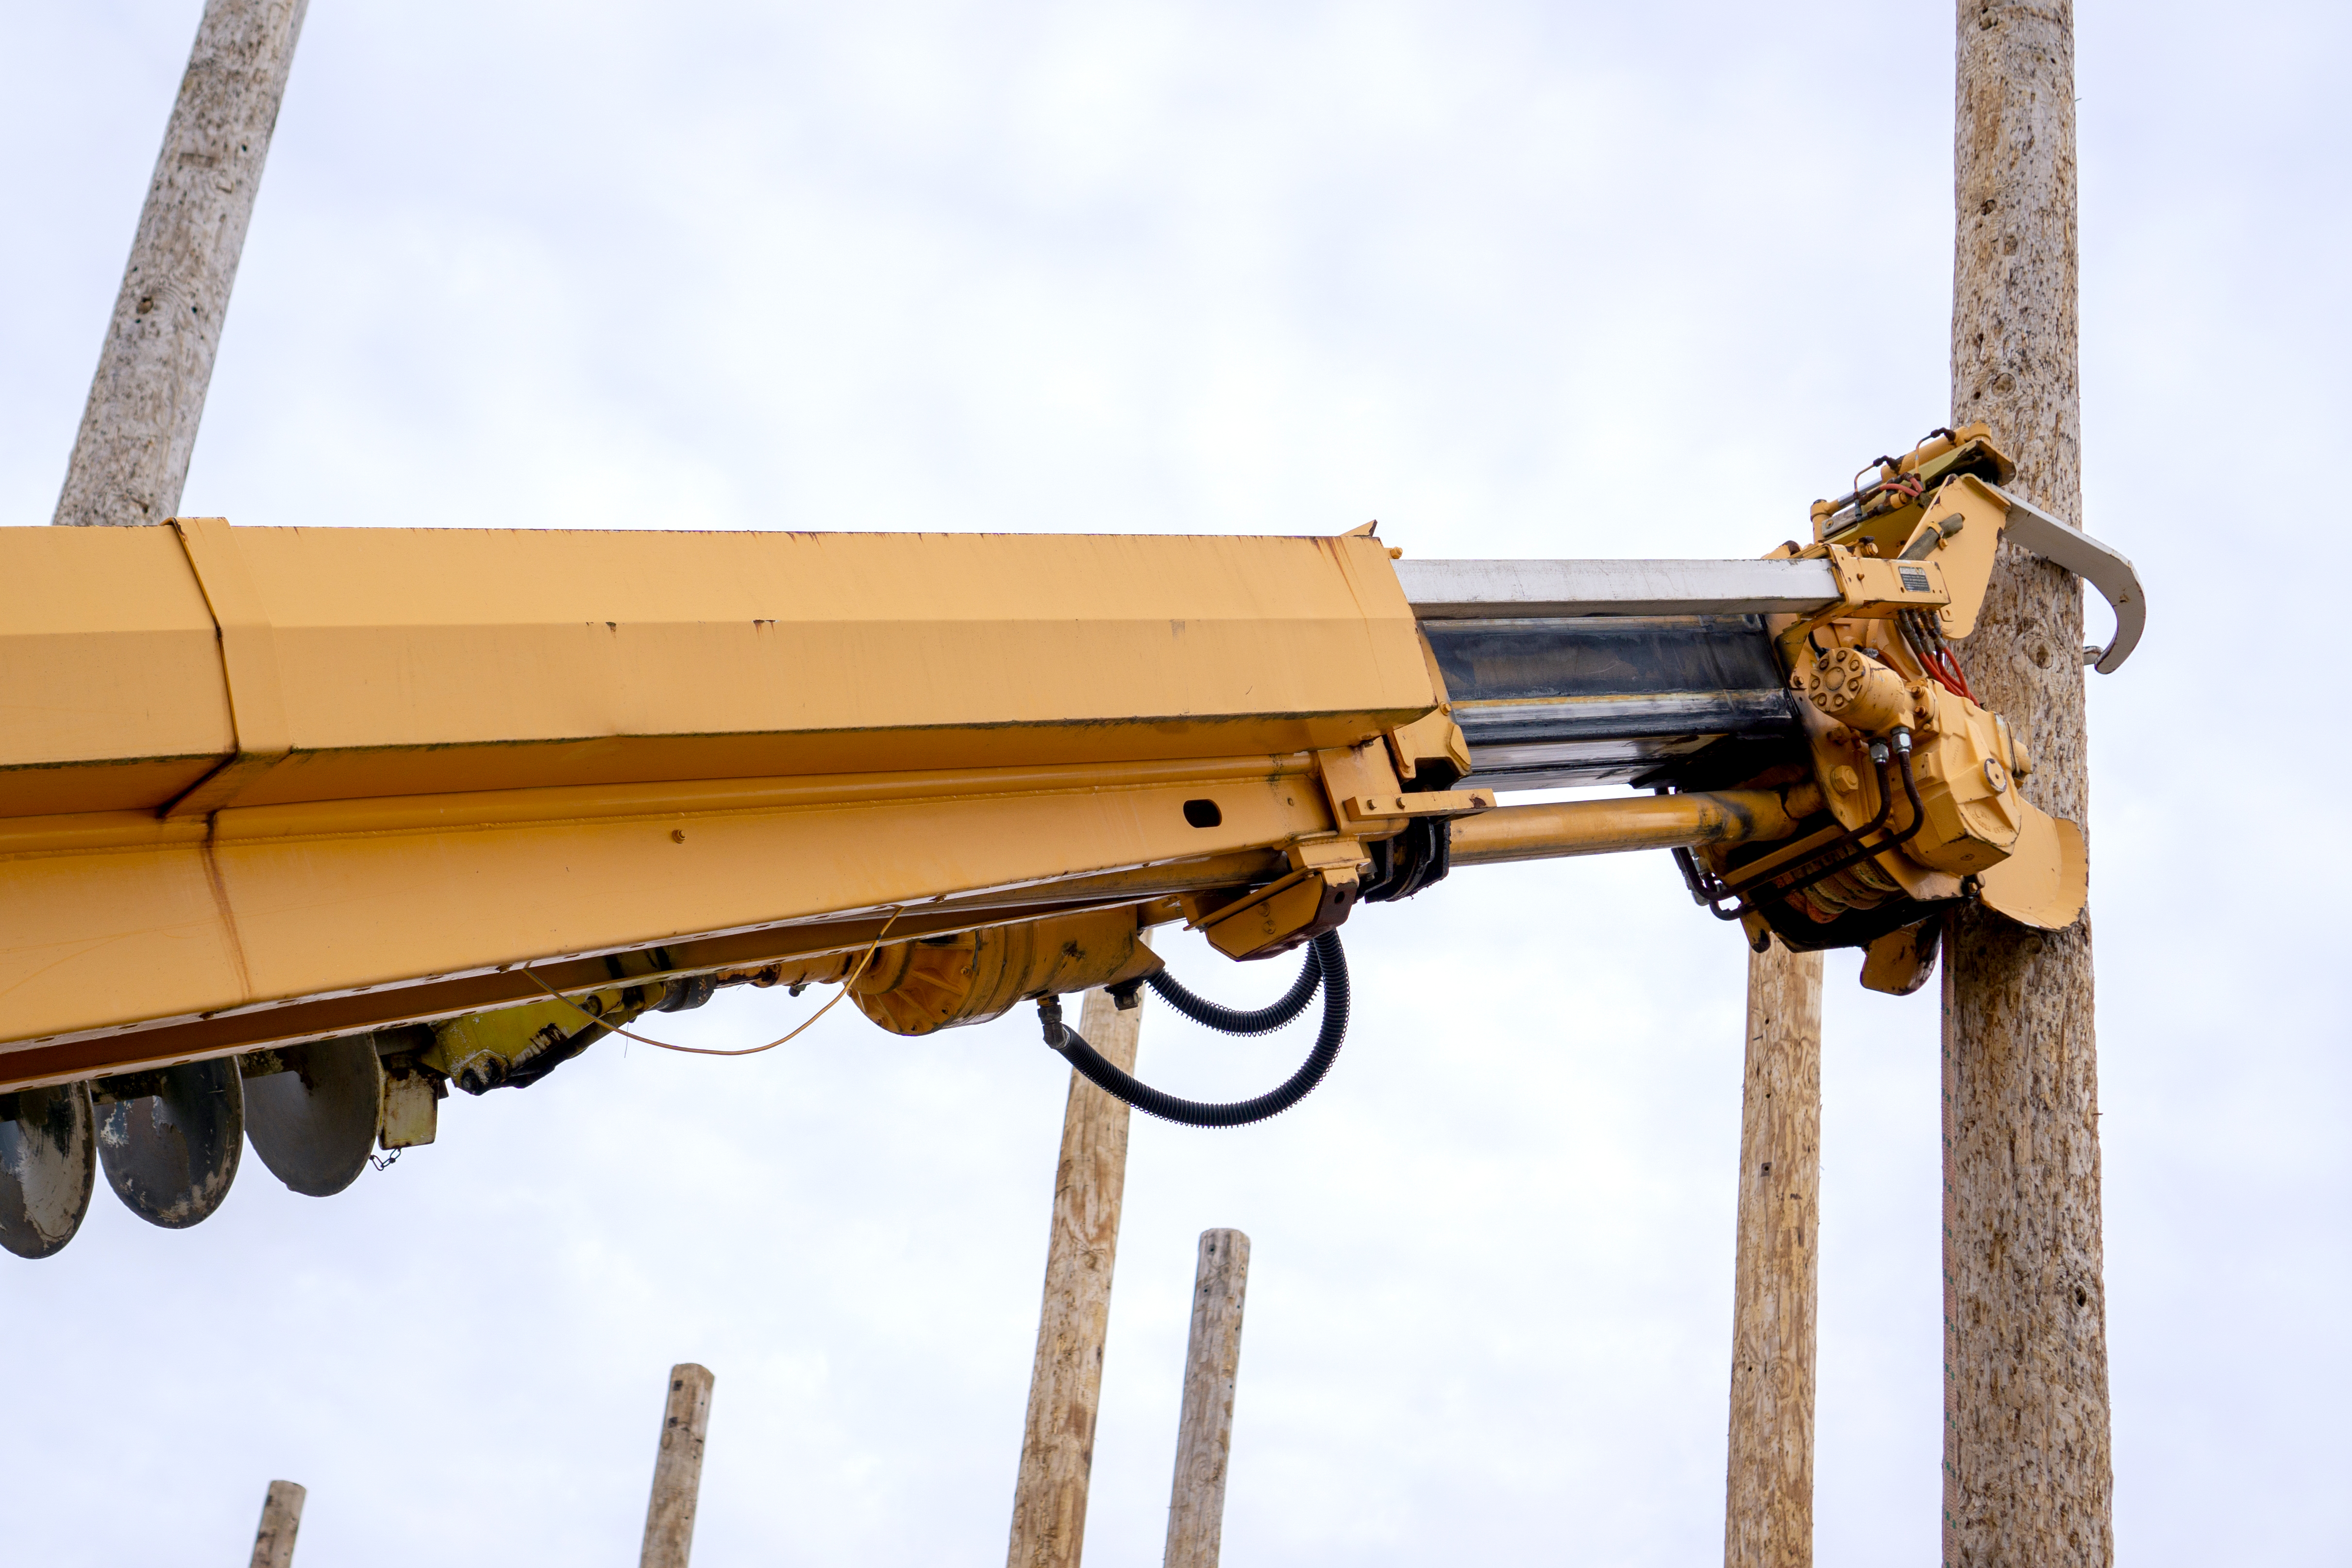 Yellow digger truck arm with claws clamped around wooden utility power line pole against cloudy sky with poles in background